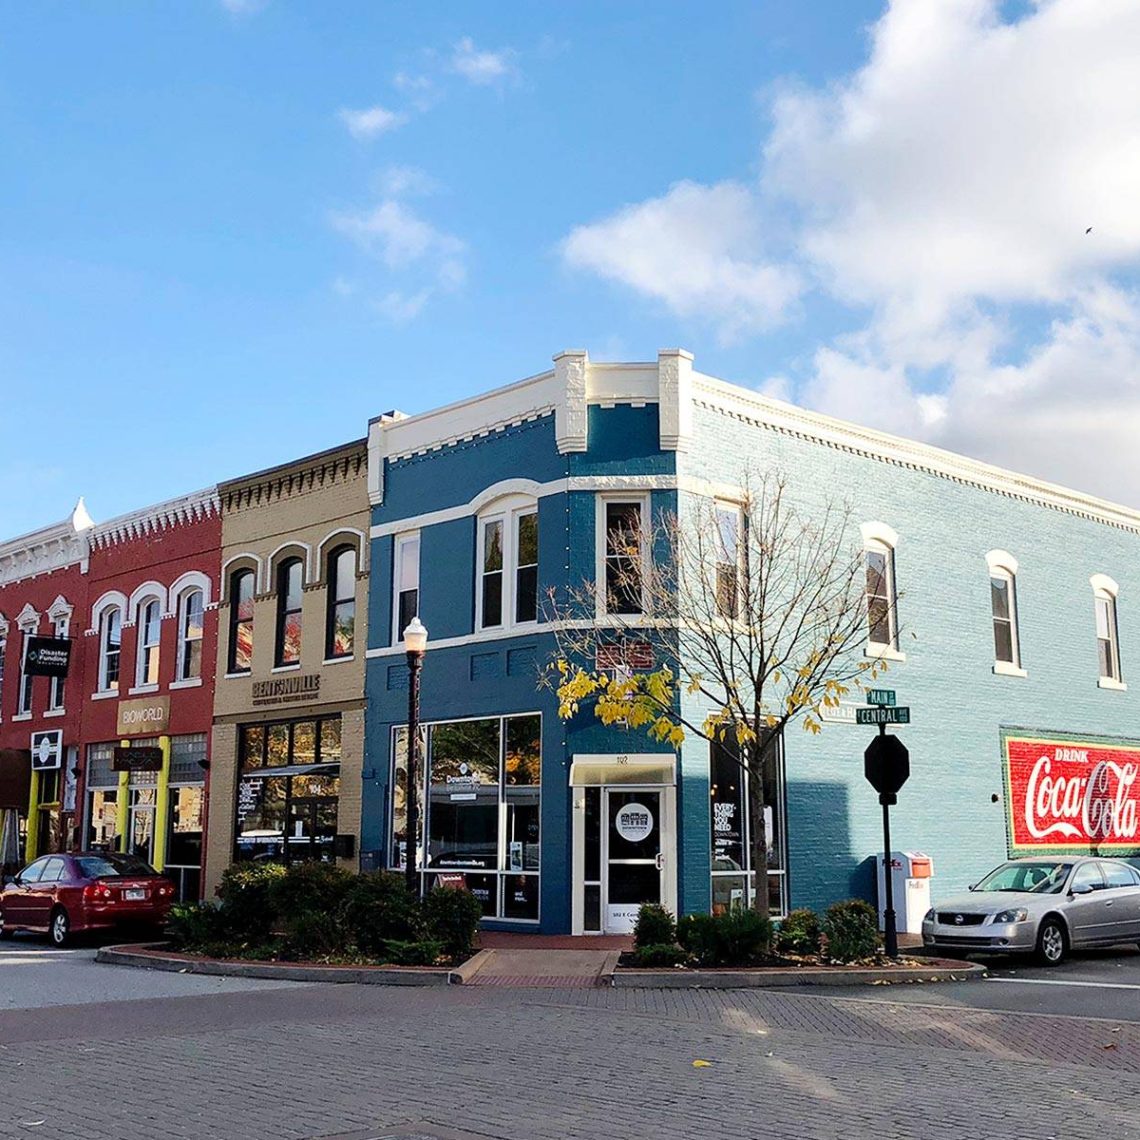 Experience the best downtown areas in Northwest arkansas